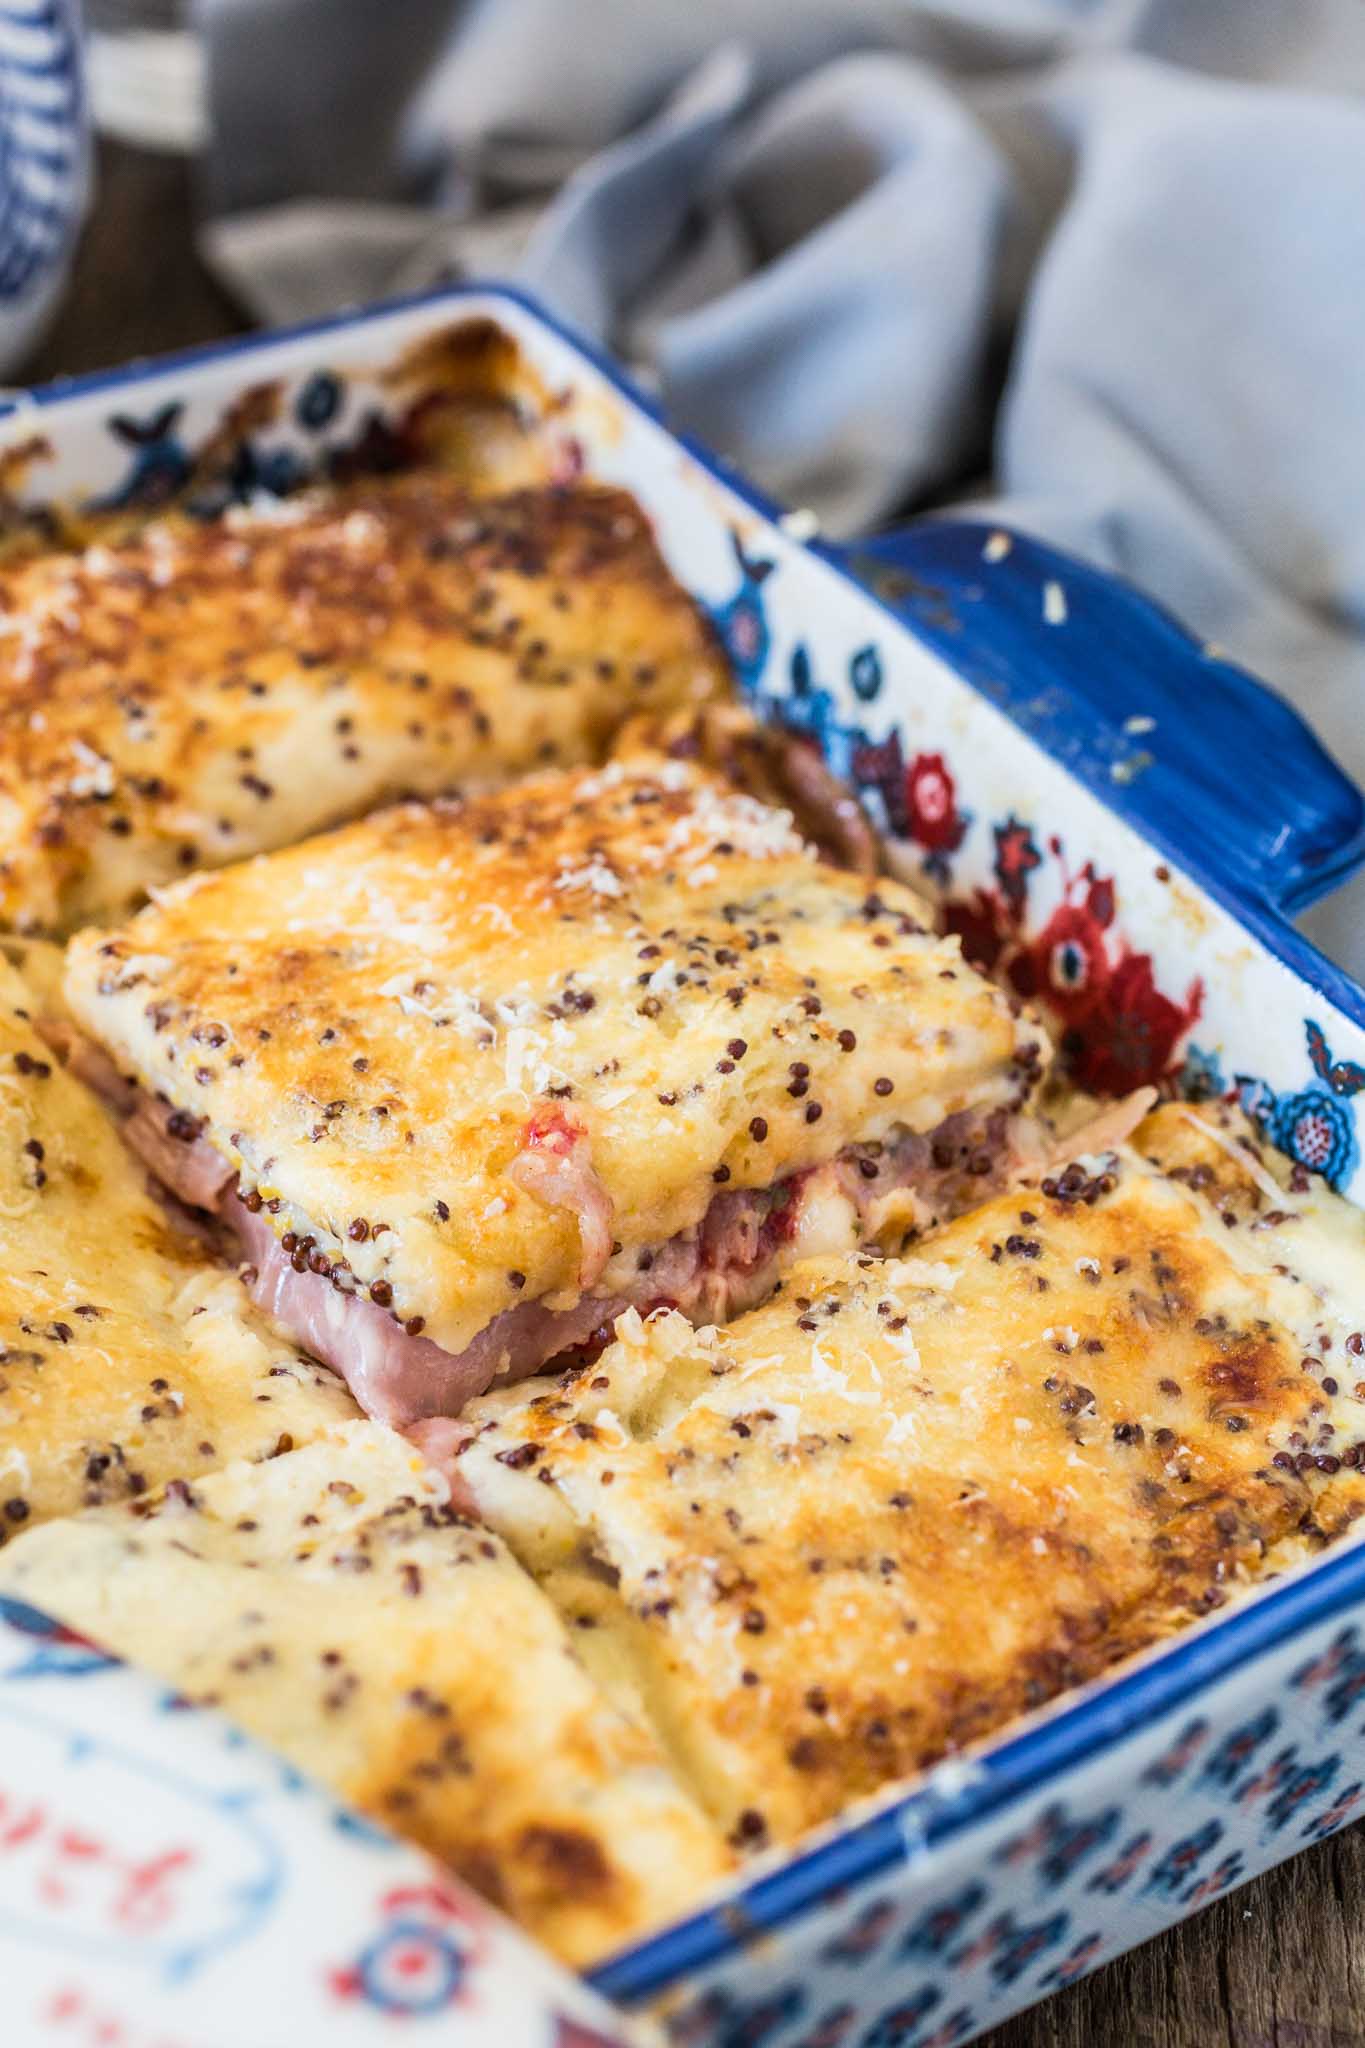 Brazilian Baked Ham and Cheese Sandwich | www.oliviascuisine.com | Who can resist a bubbly Baked Ham and Cheese Sandwich coming hot out of the oven? This Brazilian version takes it up a notch, because the sandwiches are covered with a delicious and creamy mustard-y white sauce. Simply to die for!